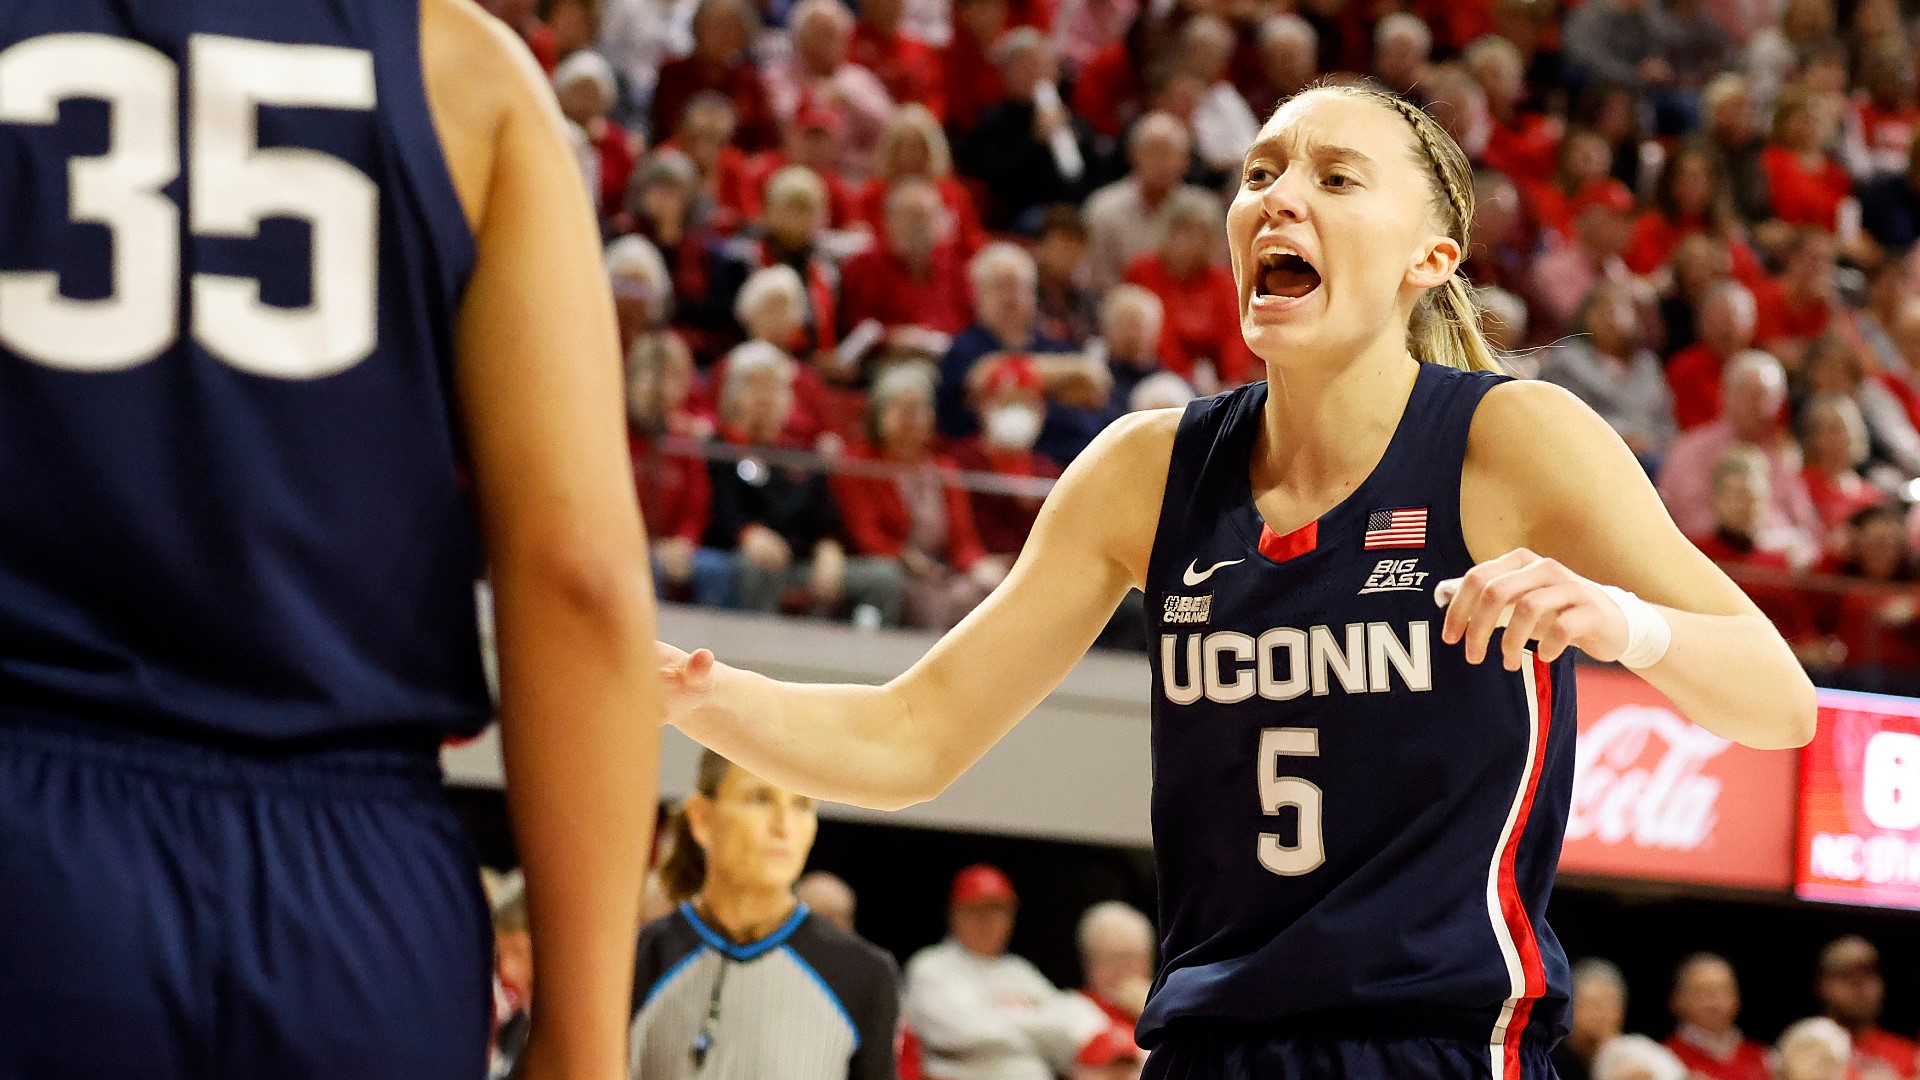 UConn's Paige Bueckers named to Ann Meyers Drysdale Top 10 | fox61.com